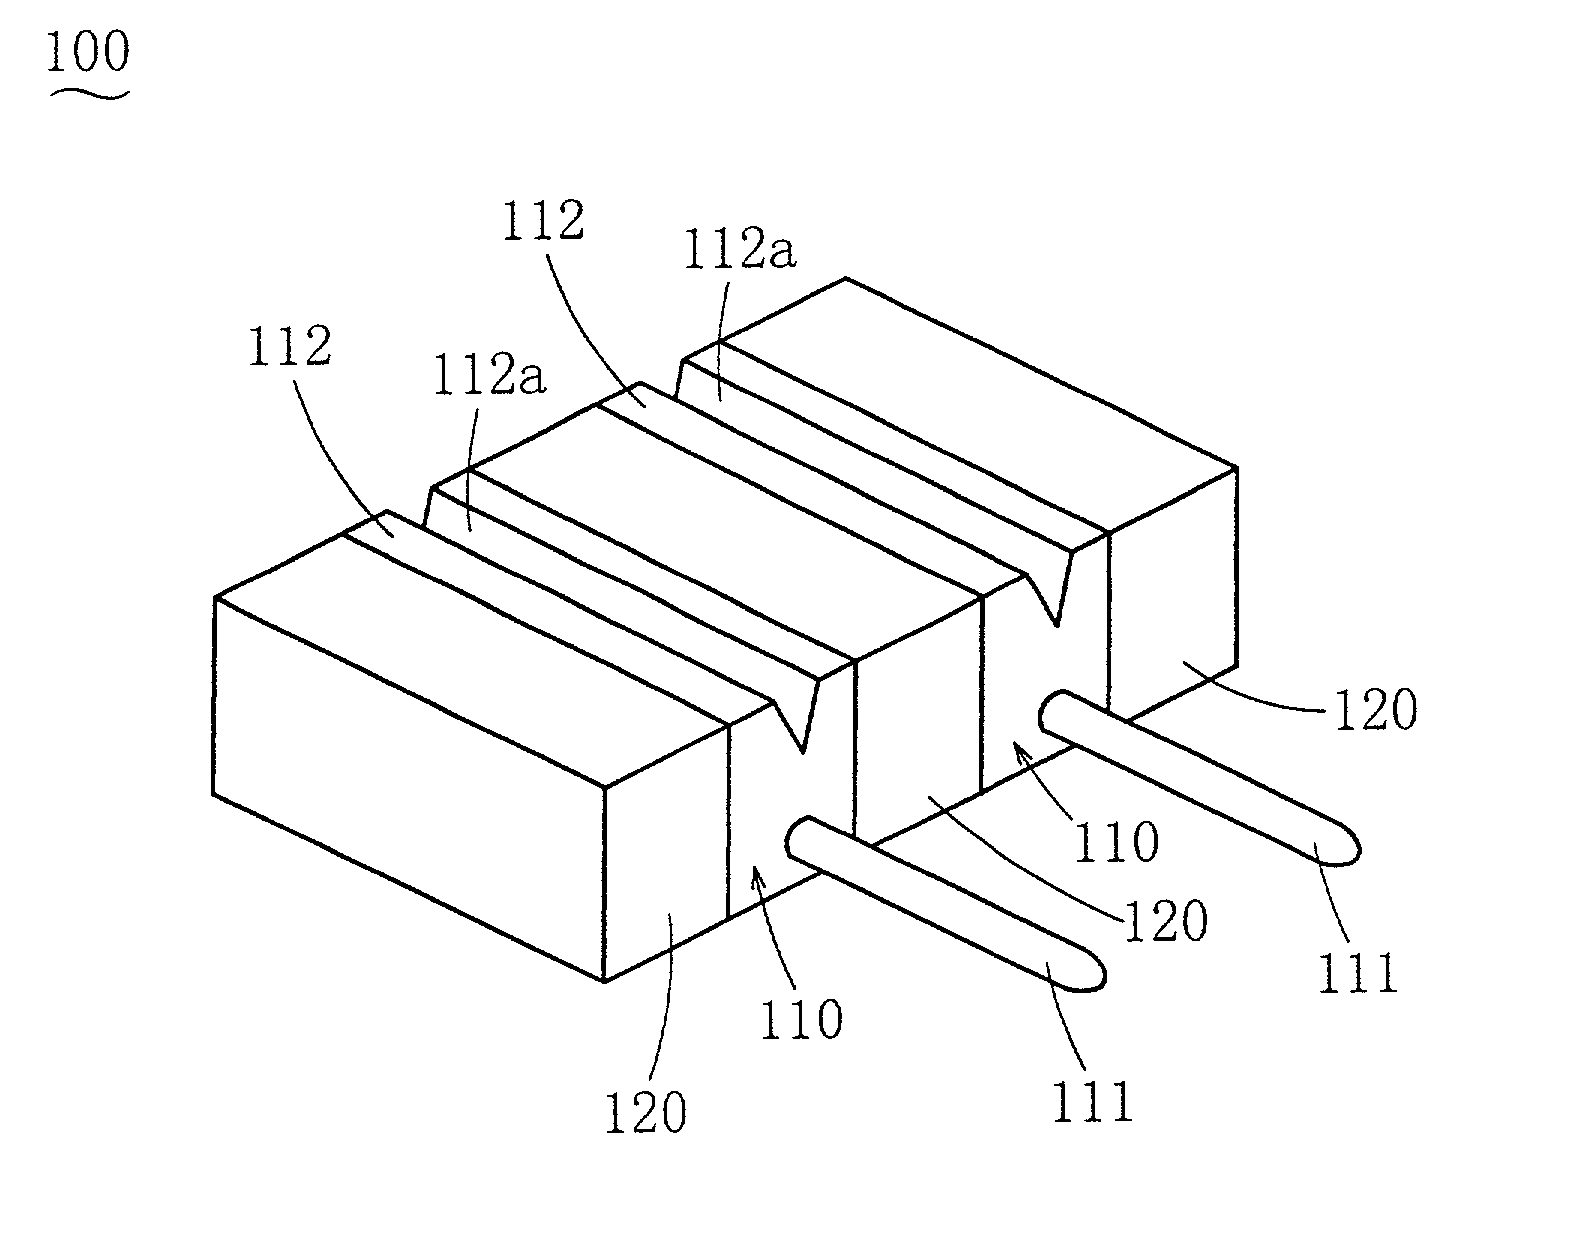 Electric connector for twisted pair cable using resin solder and a method of connecting electric wire to the electric connector